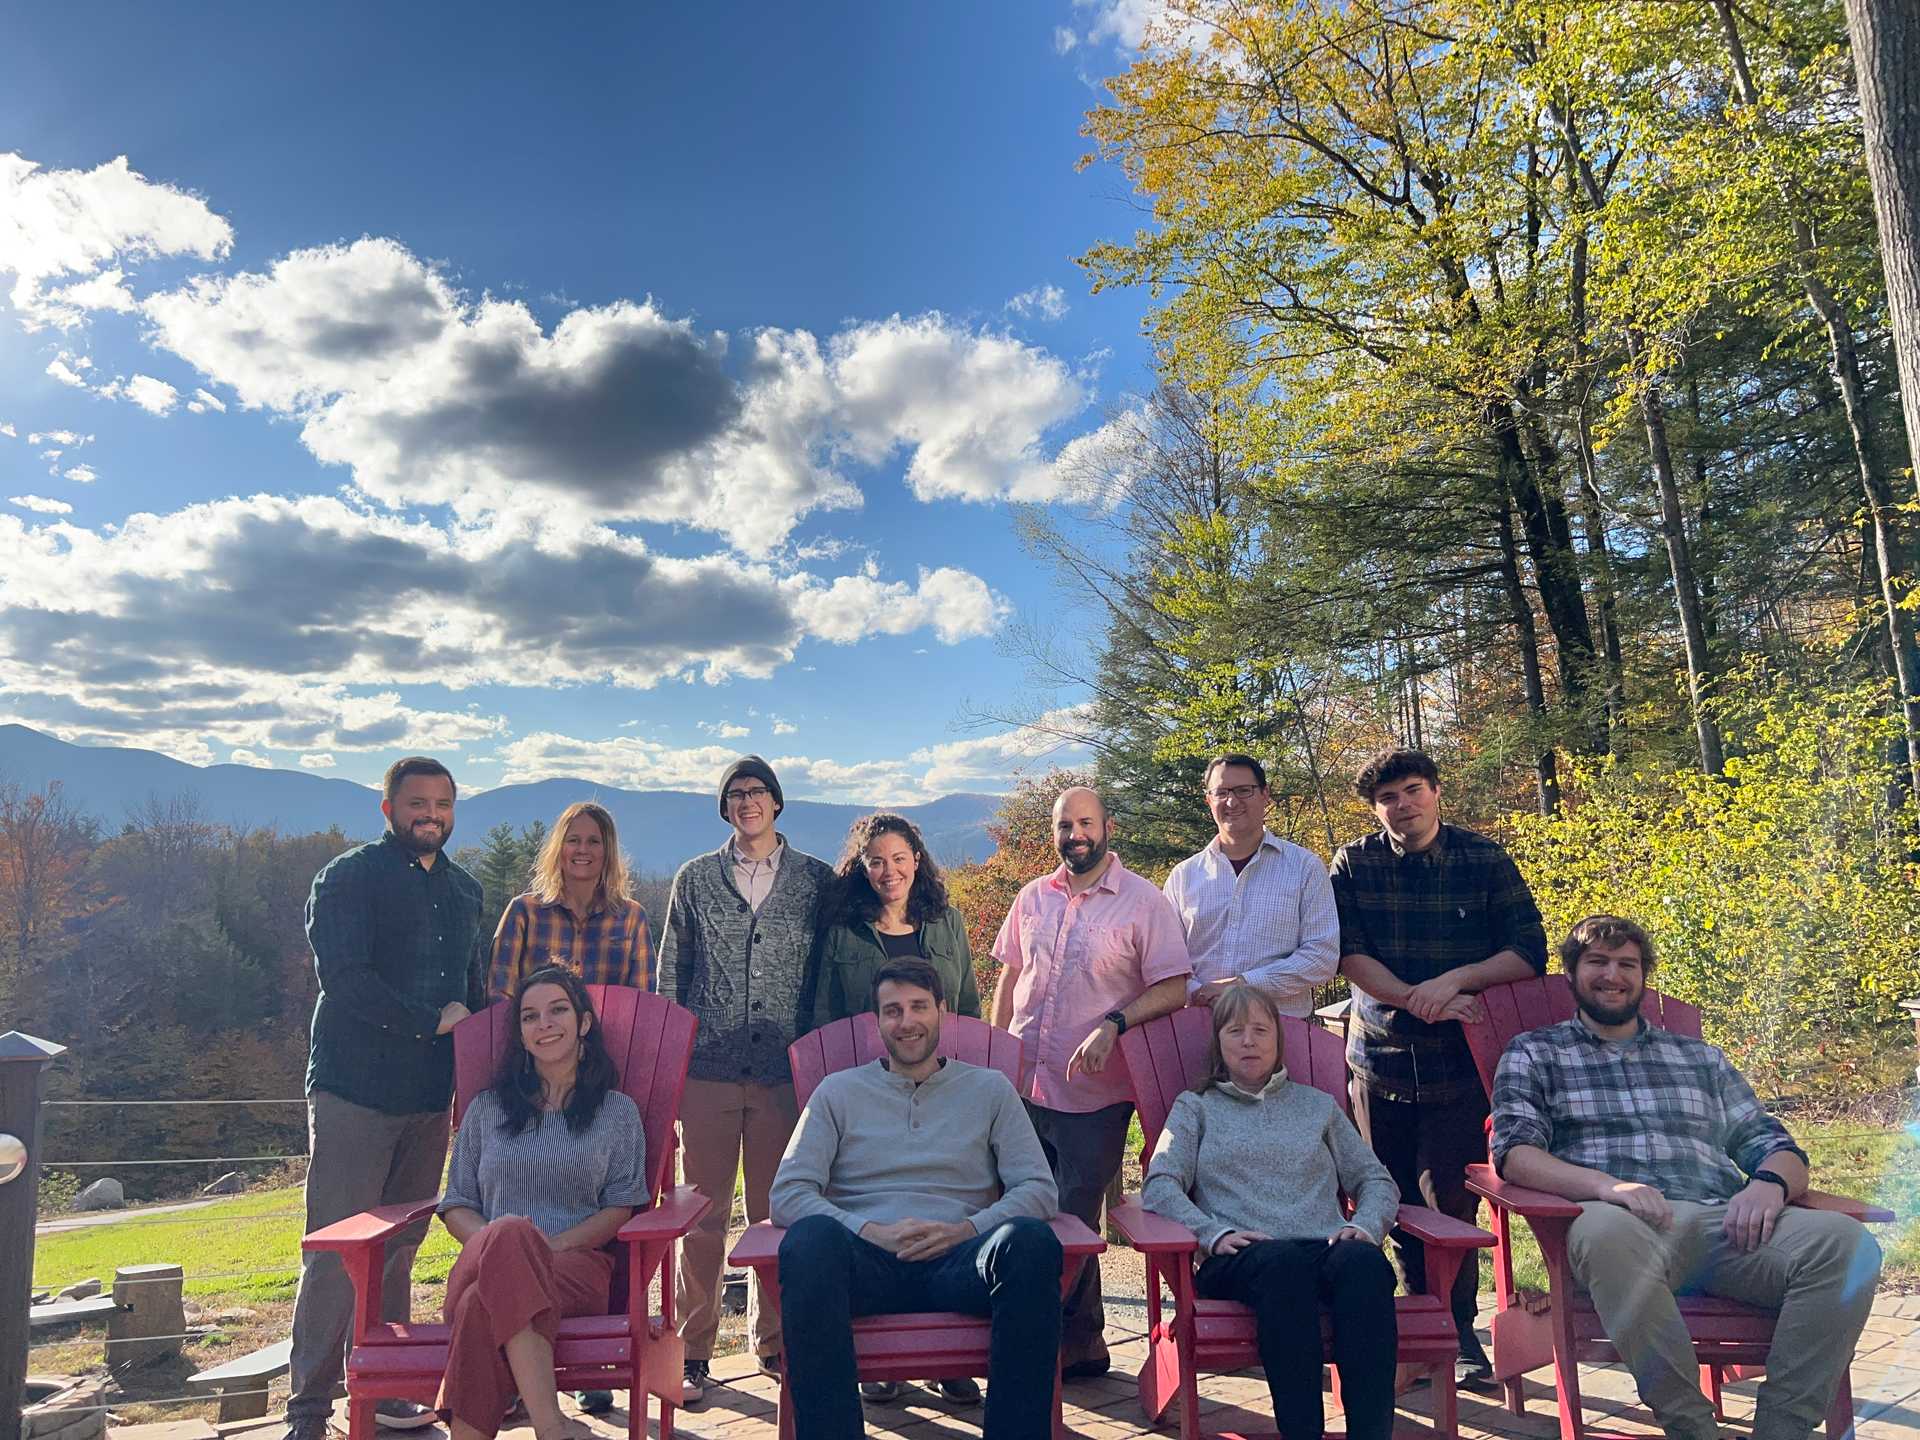 All Redfin Solutions employees gathered outside with New Hampshire's White Mountains in background